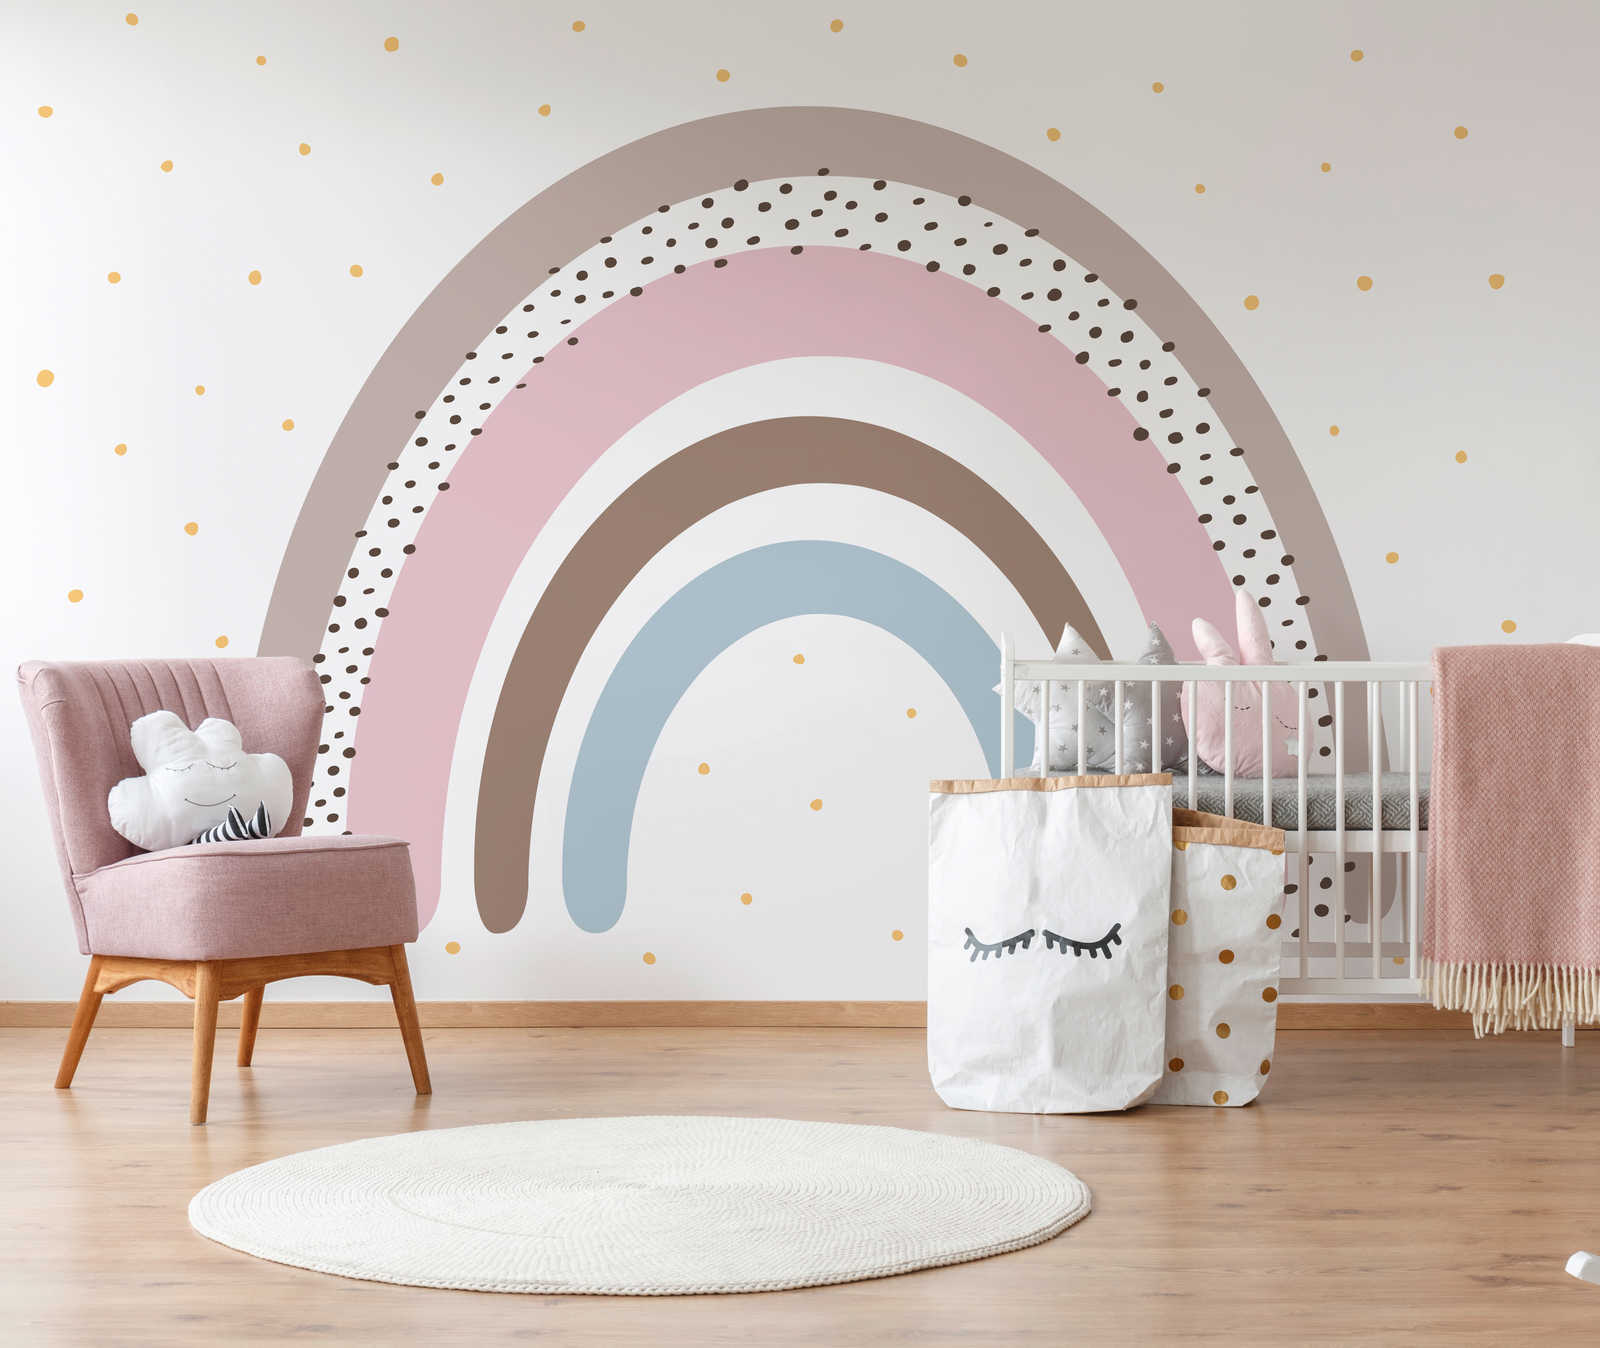         Photo wallpaper rainbow with dots for baby room
    